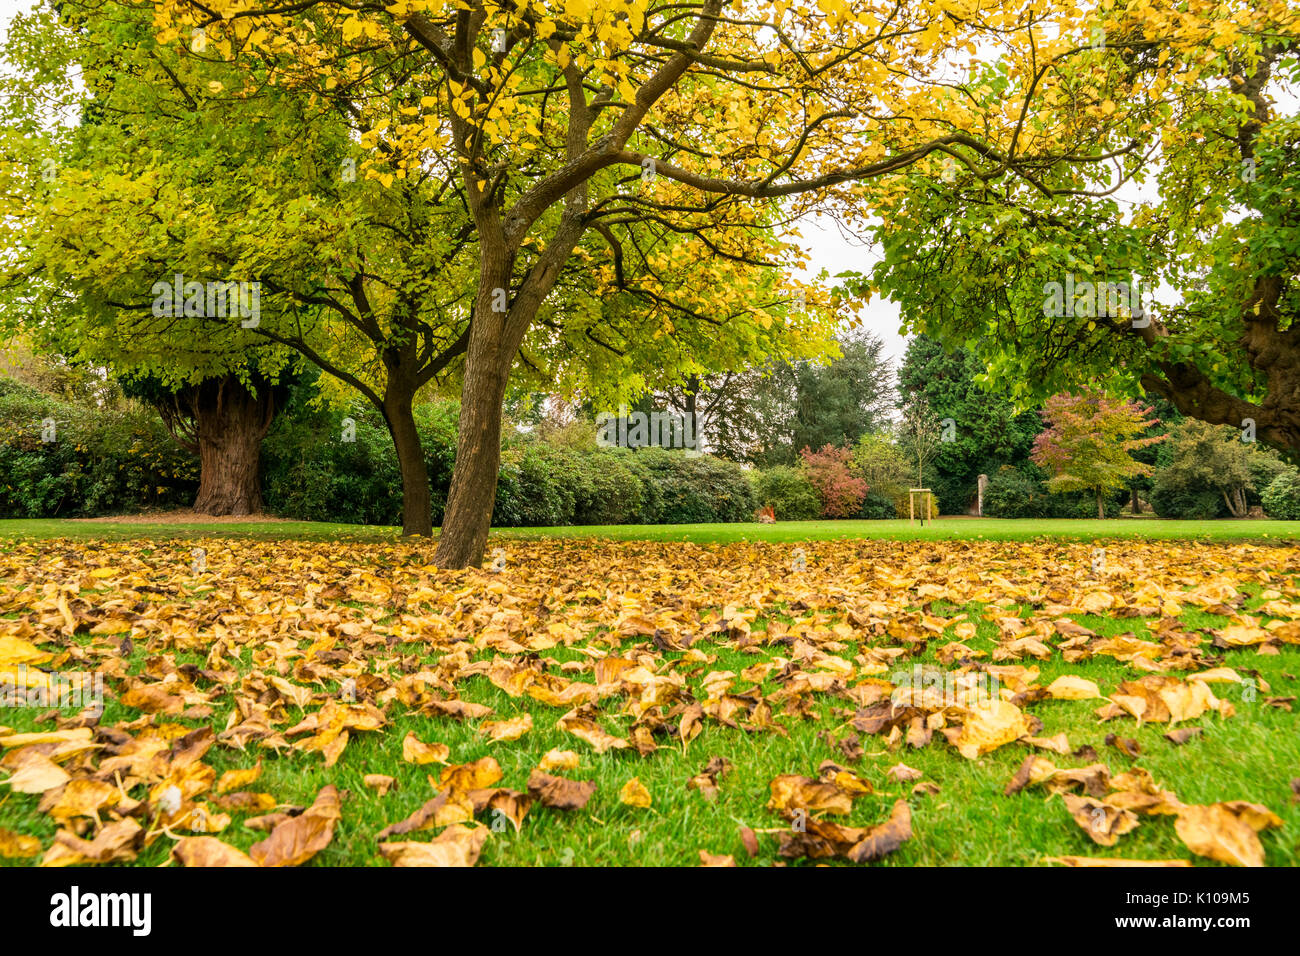 leaves falling from tree wallpaper